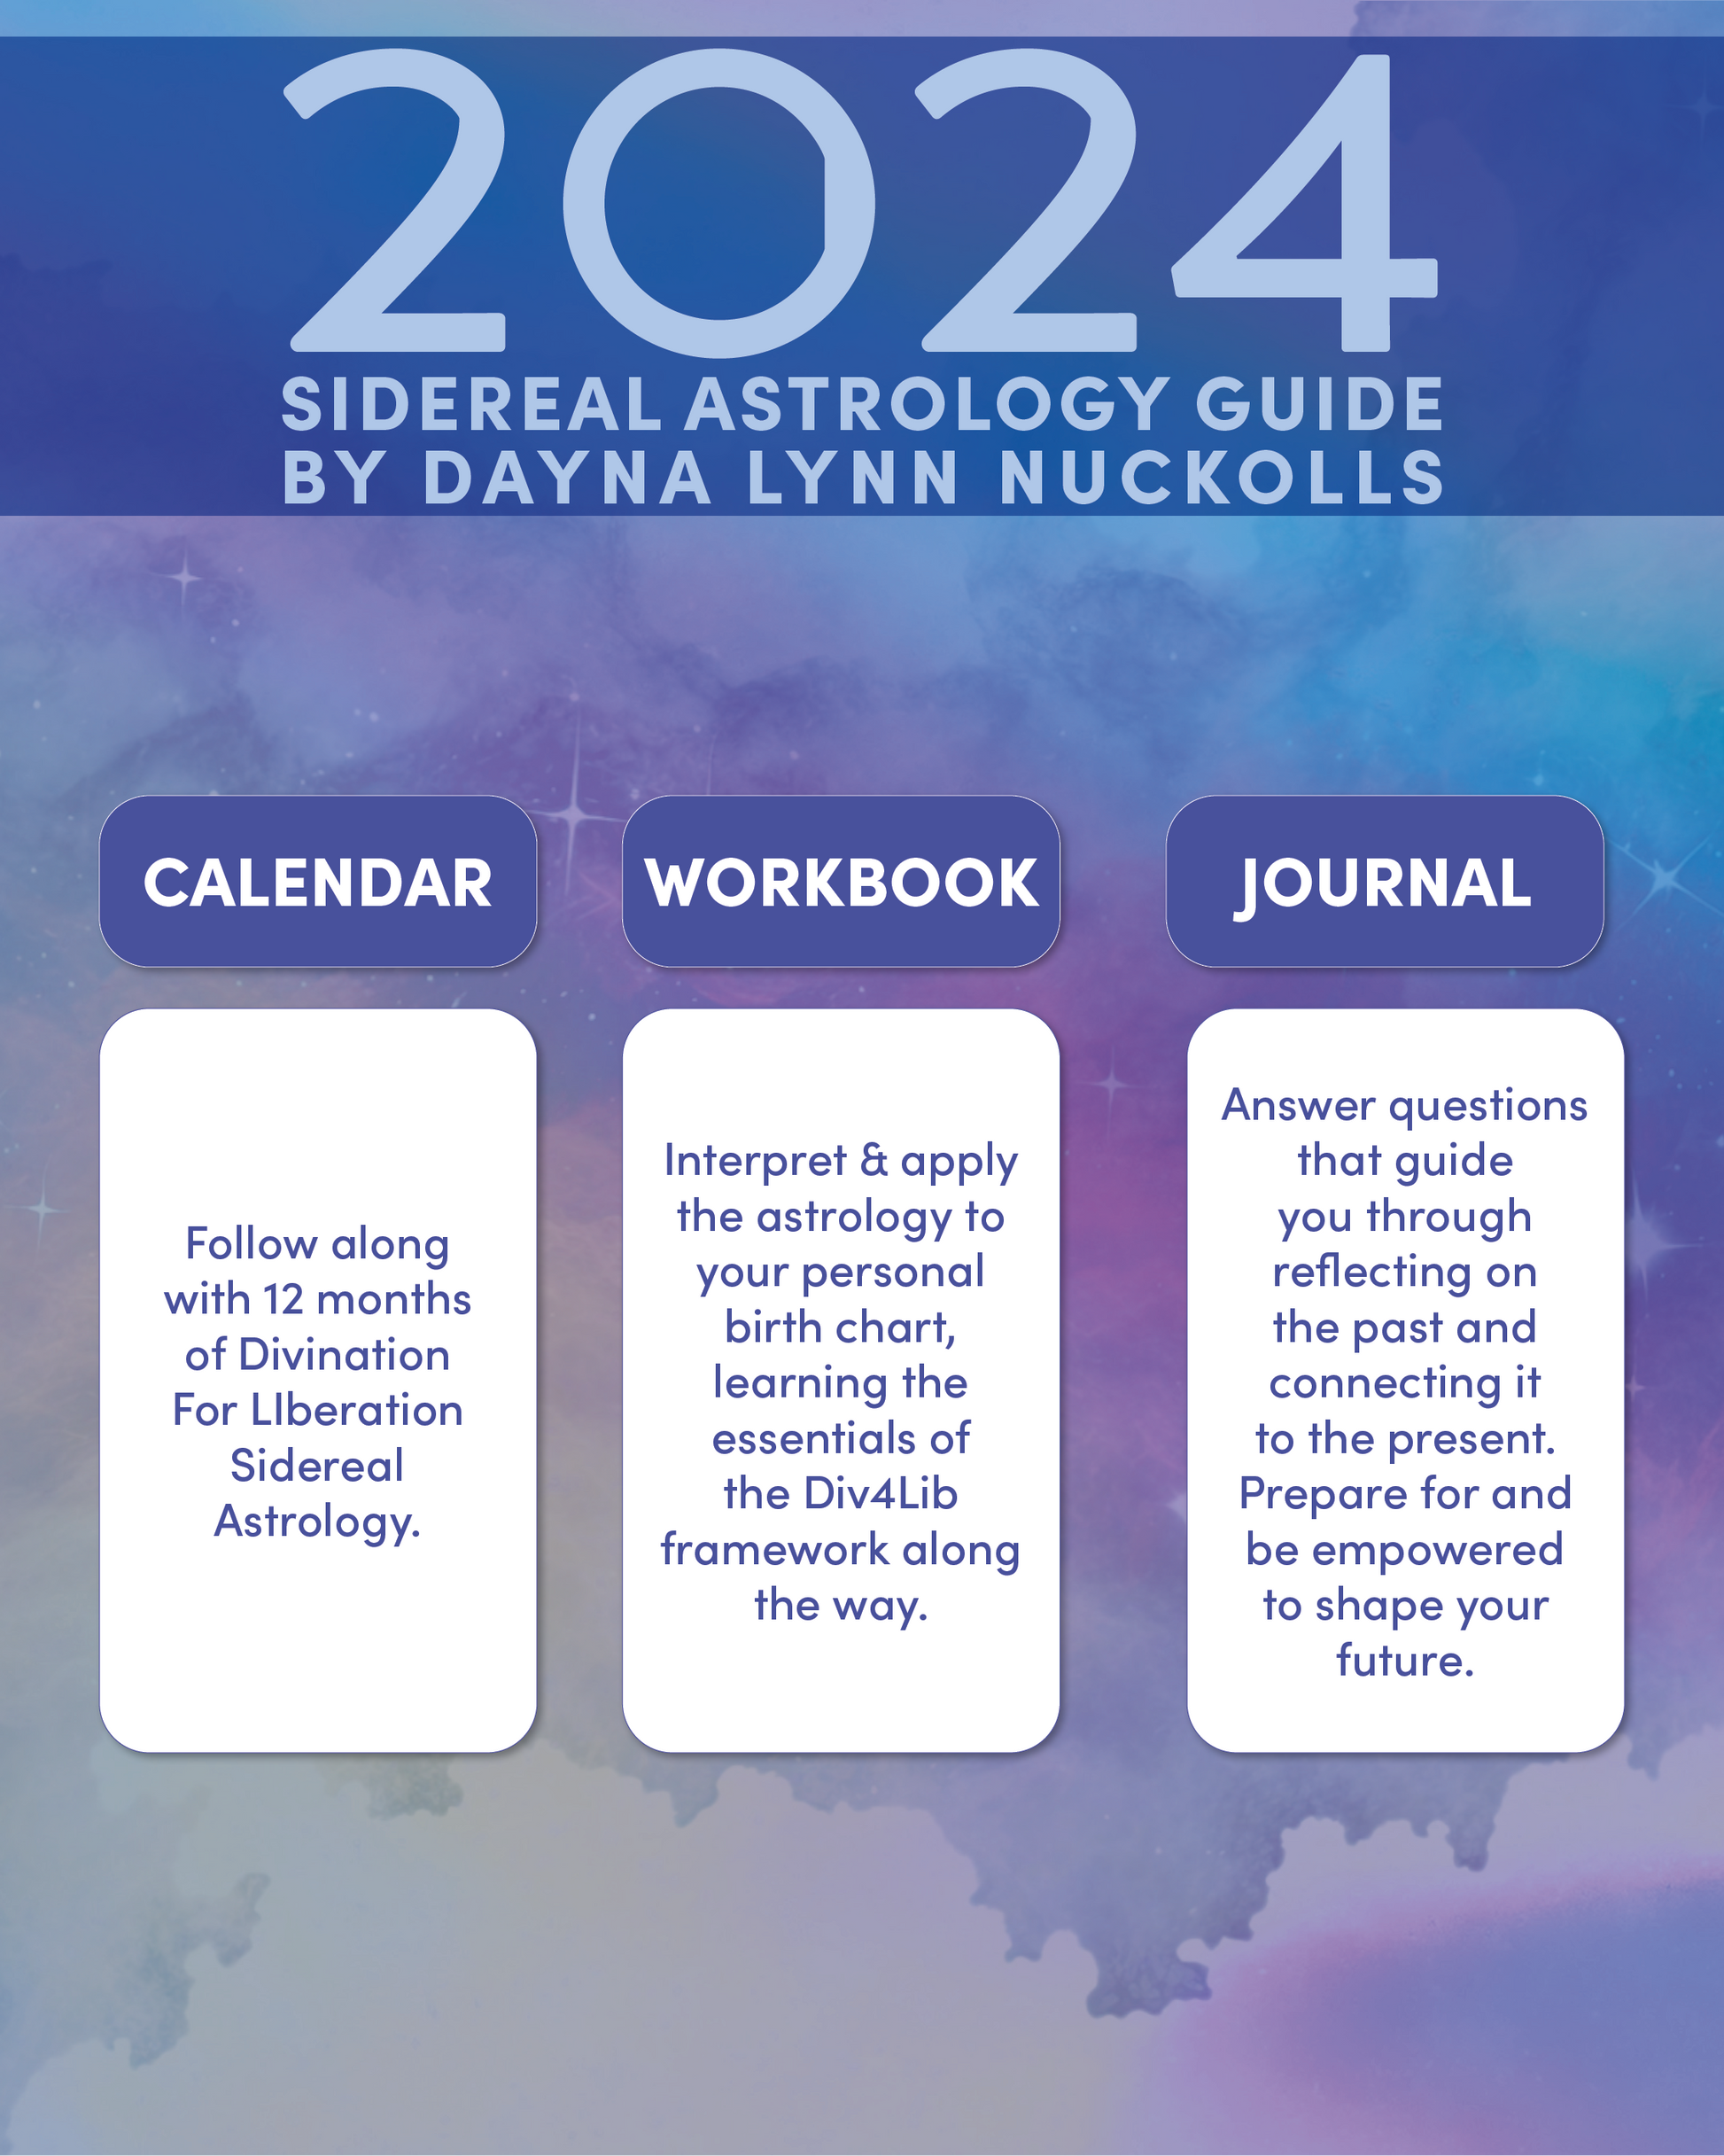 2024 Sidereal Astrology Guide is a sidereal astrology calendar using the Divination For Liberation Framework of sidereal Astrology. The 2024 Sidereal Astrology Guide is also a astrology workbook and an astrology journal.